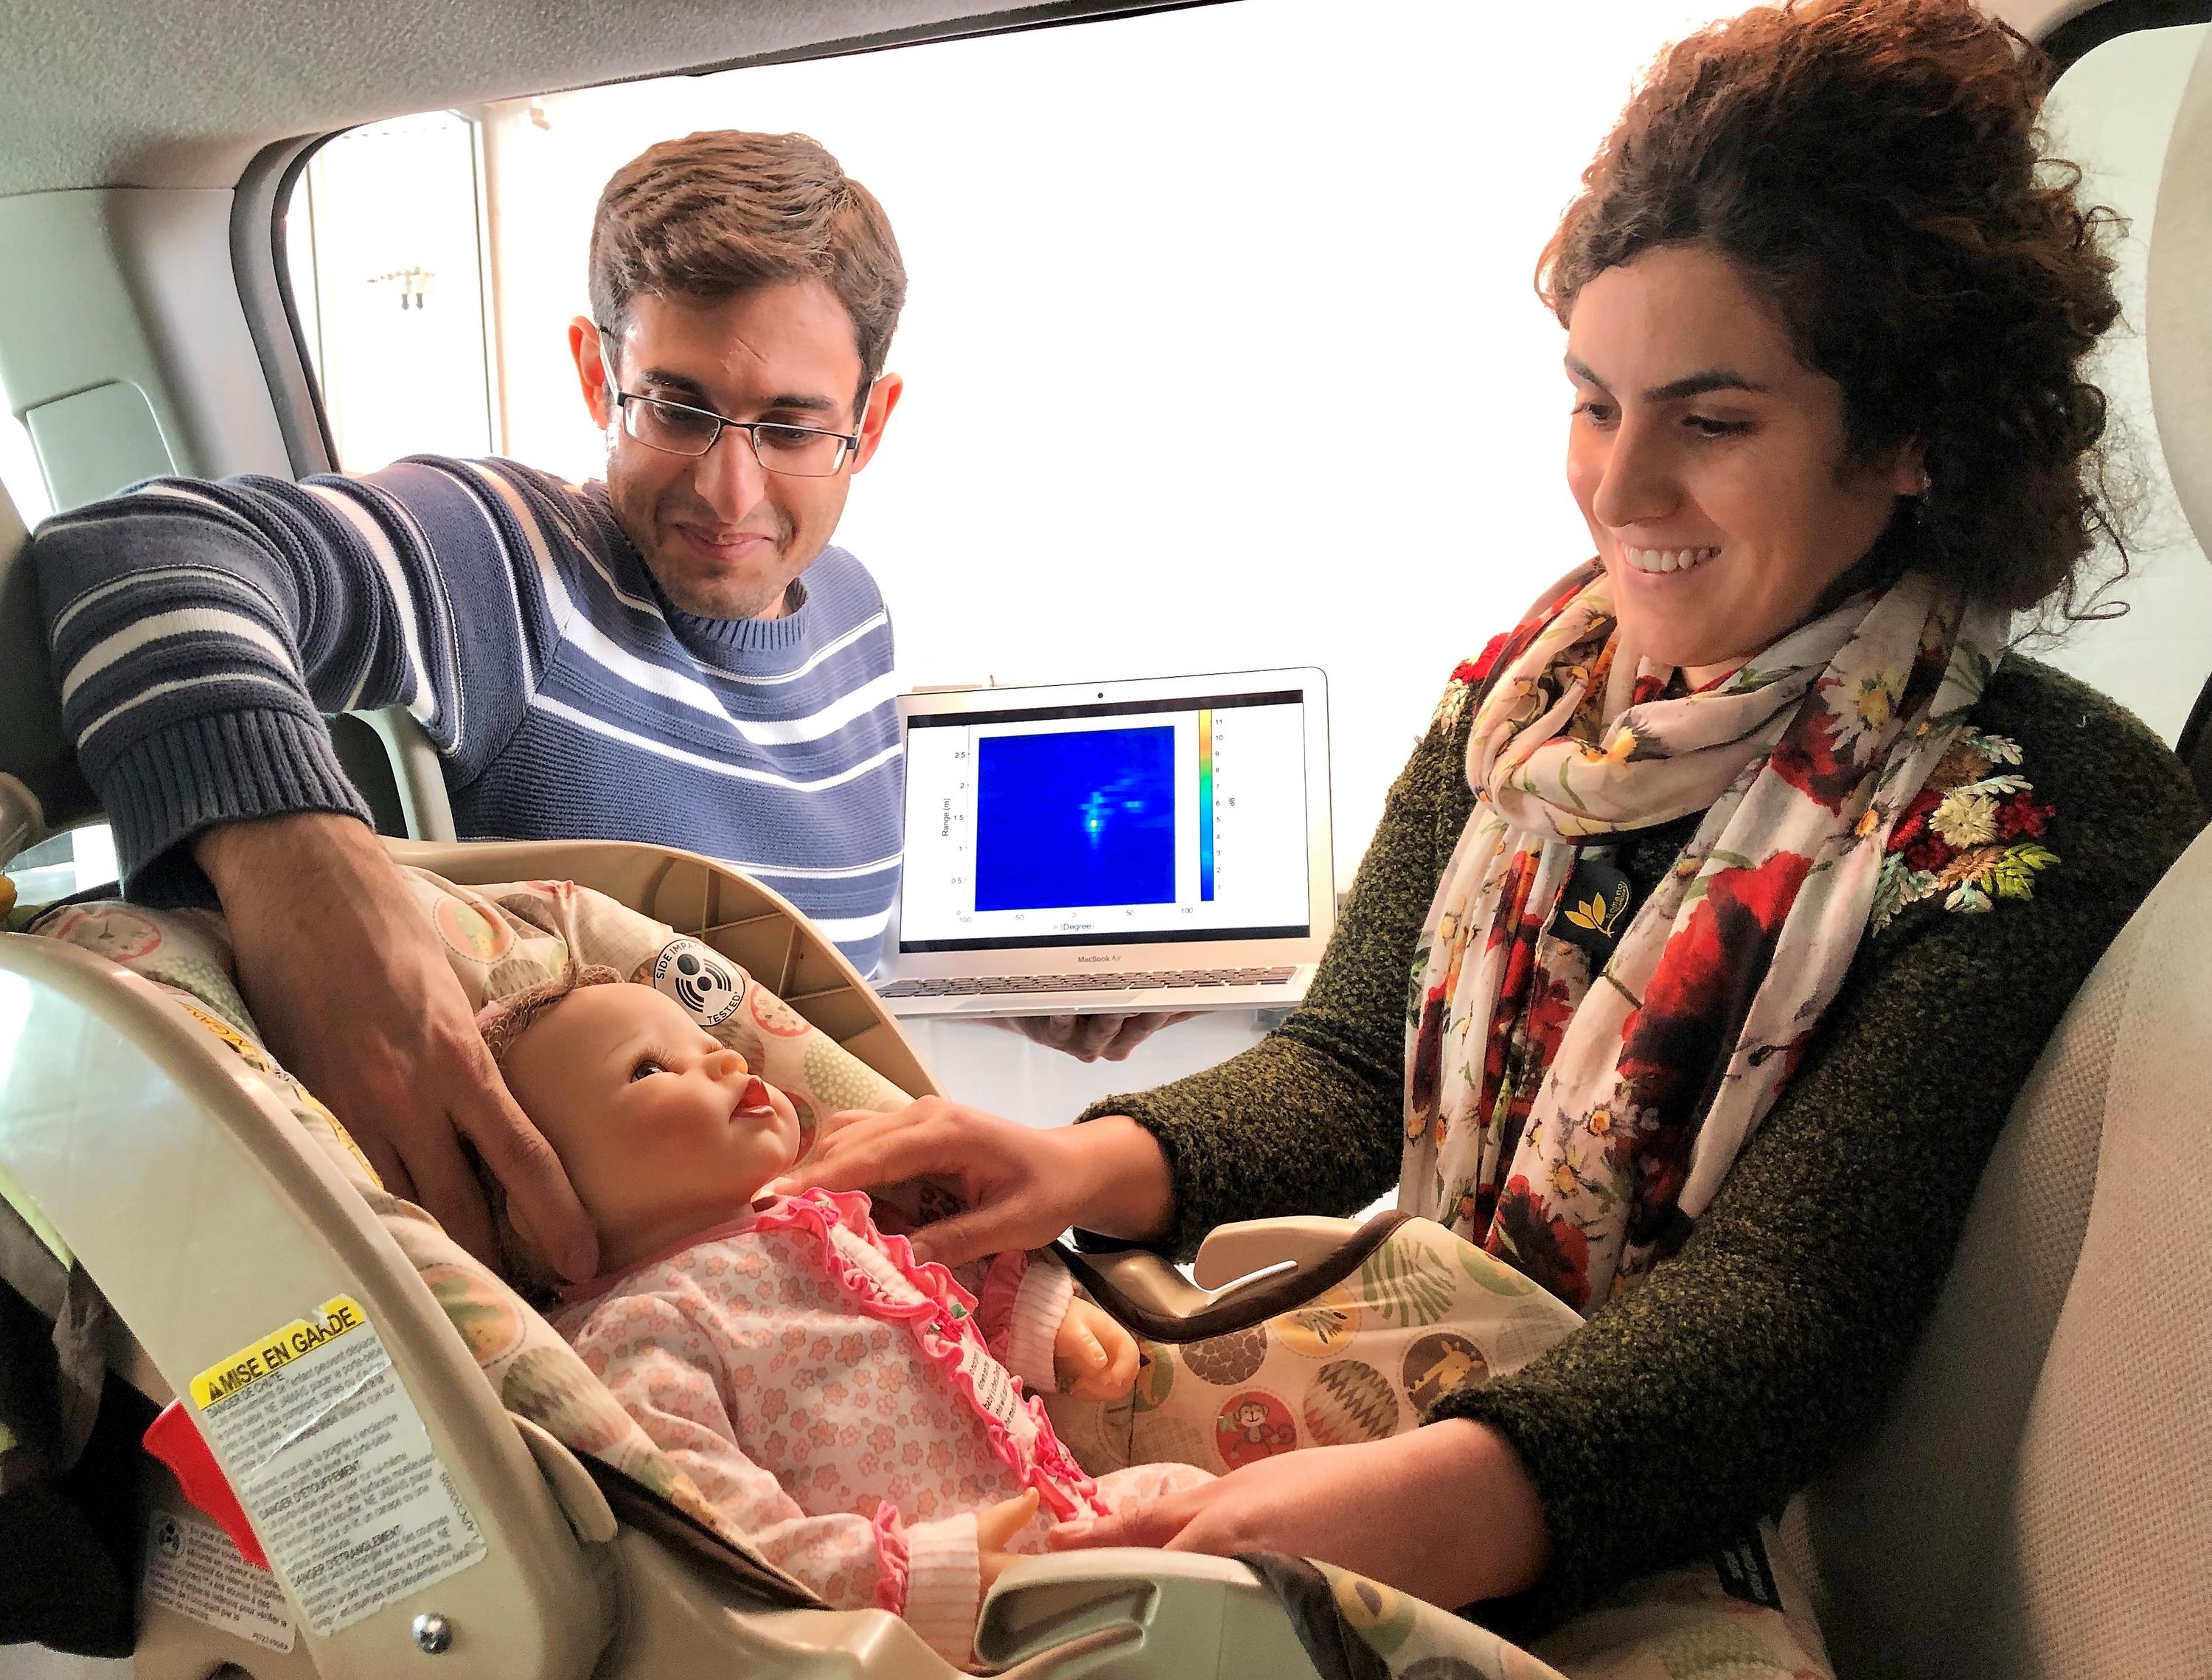 Graduate students Mostafa Alizadeh, left, and Hajar Abedi position a doll, modified to simulate breathing, in a minivan during testing of a new sensor.